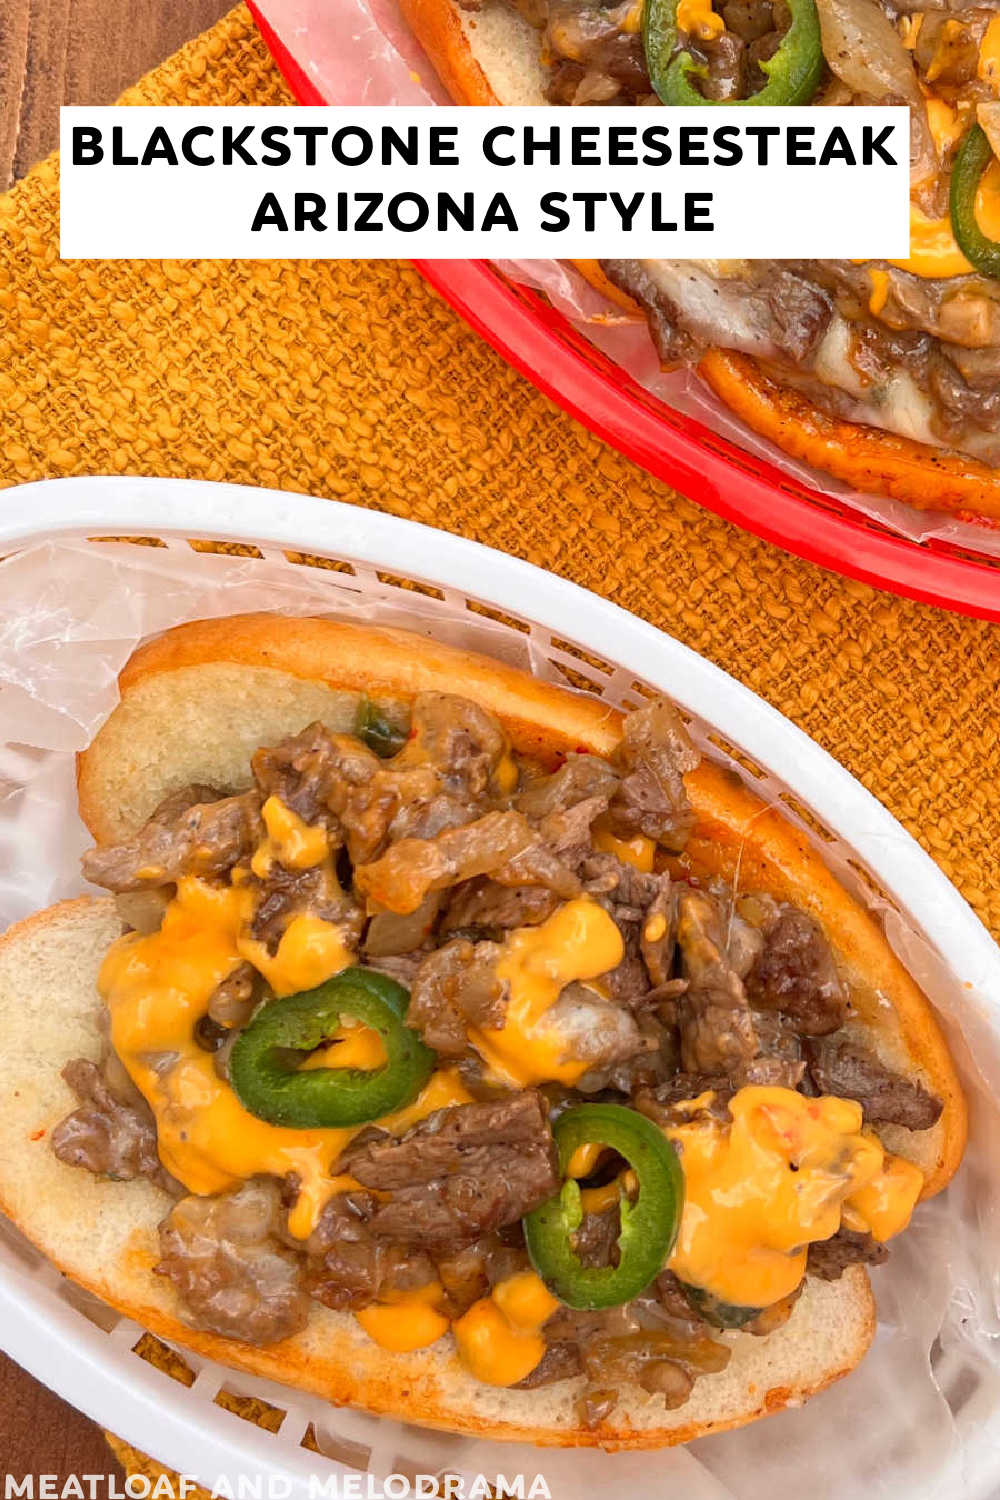 This Blackstone Cheesesteak recipe ( Arizona Style ) combines ribeye steak, jalapeño peppers and cheese on a bolillo roll. A delicious sandwich you can make on the Blackstone griddle or a skillet. This Southwest cheesesteak is not your average Philly cheesesteak recipe! via @meamel